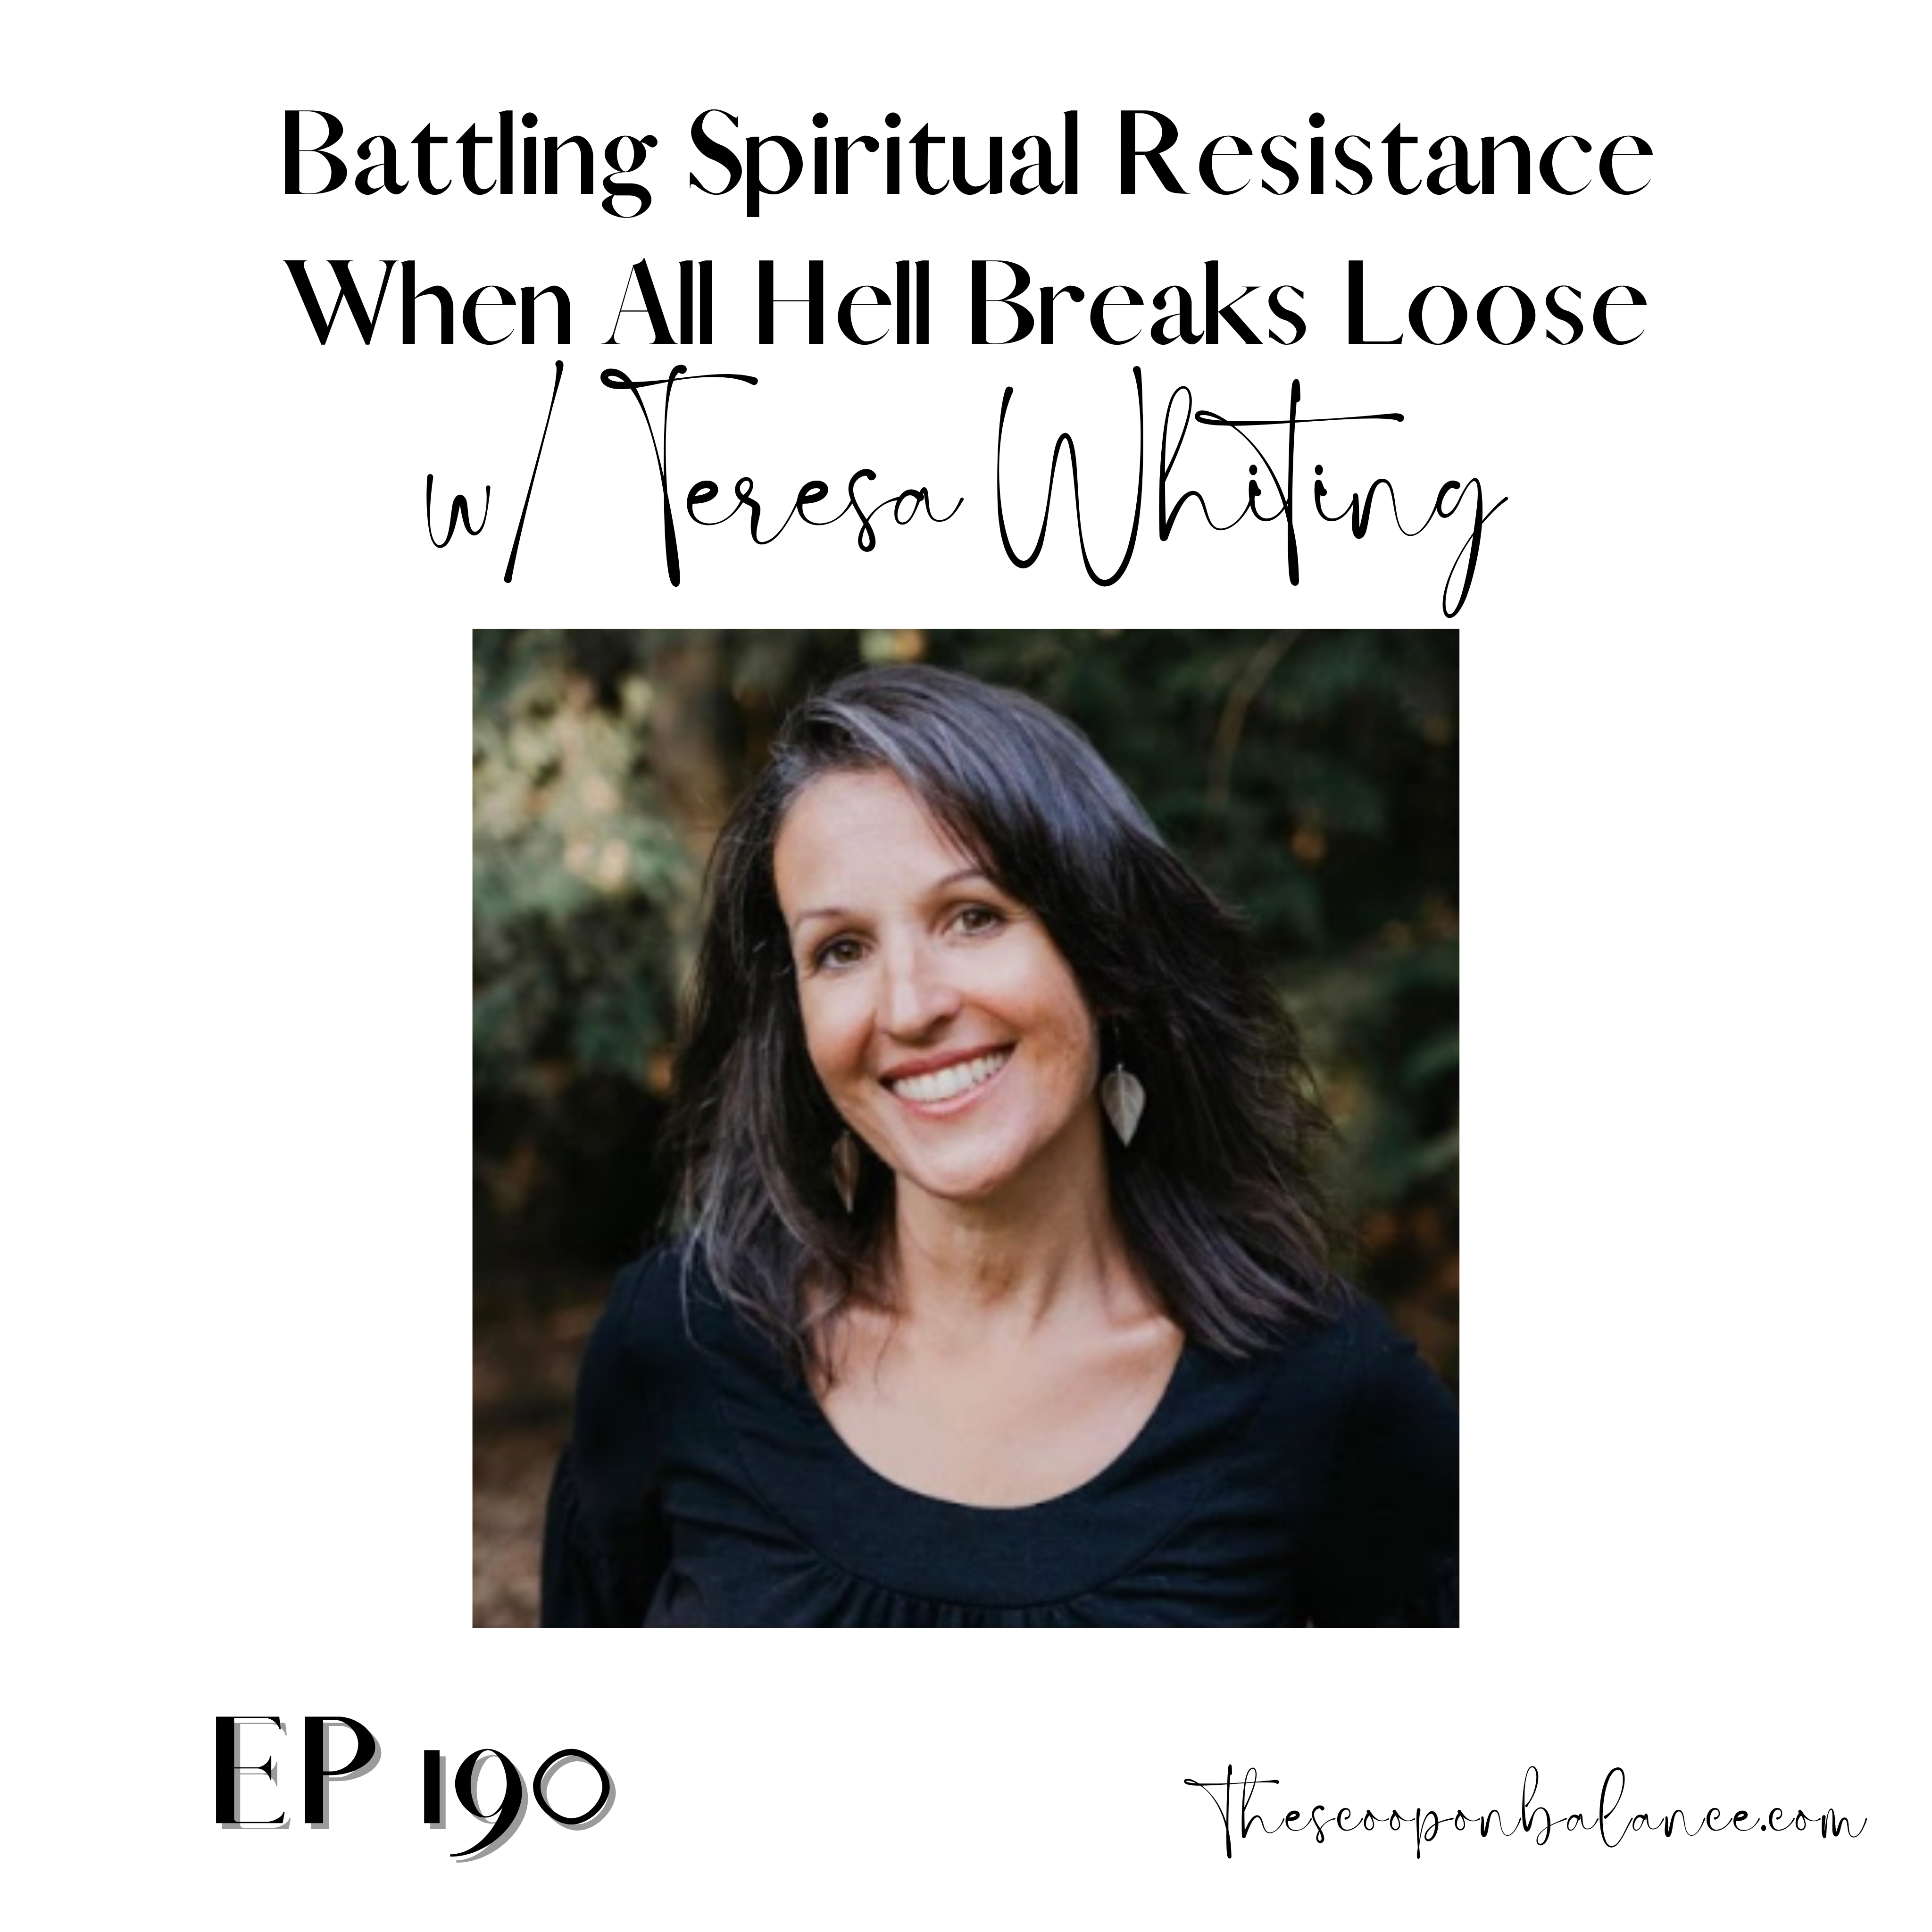 Ep 190: Battling Spiritual Resistance When All Hell Breaks Loose with Teresa Whiting